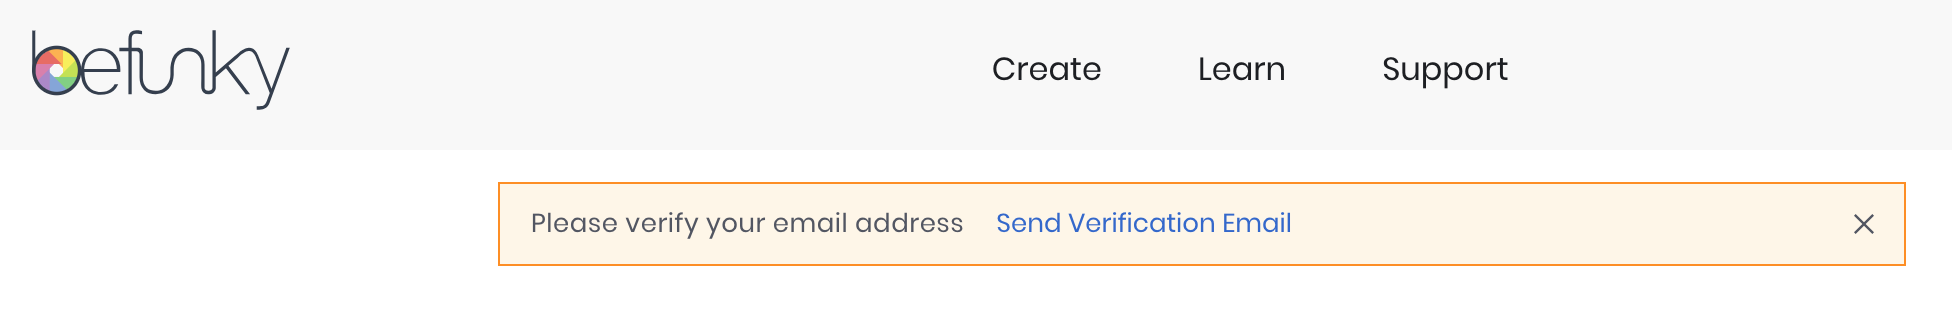 verify-email.png